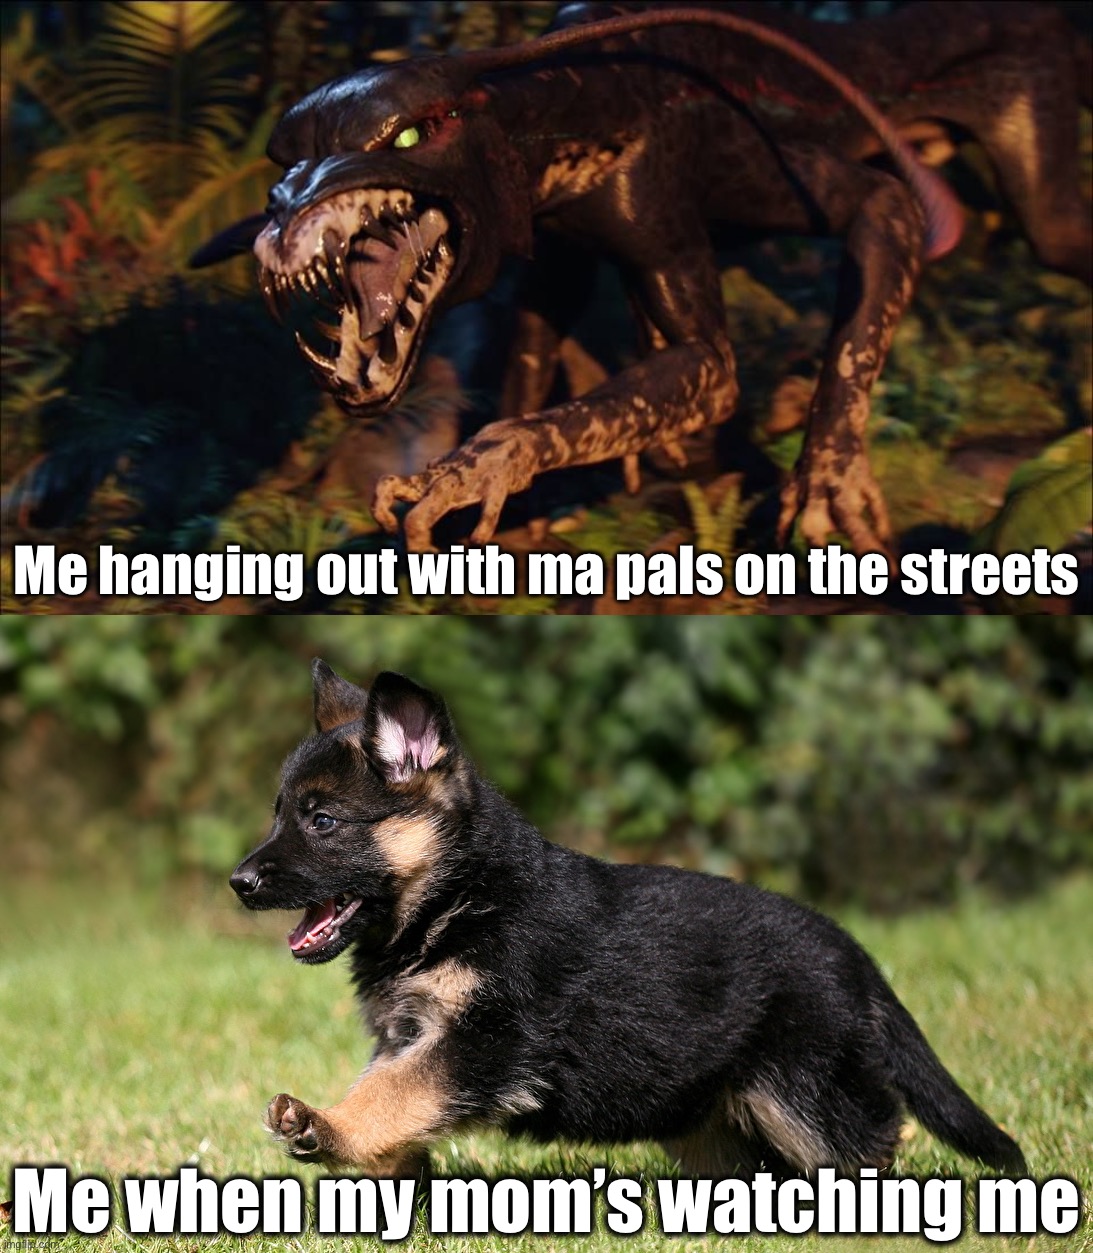 Bad dawg, good dog | Me hanging out with ma pals on the streets; Me when my mom’s watching me | image tagged in memes,dog memes,dogs,puppy,cute puppies,so true memes | made w/ Imgflip meme maker